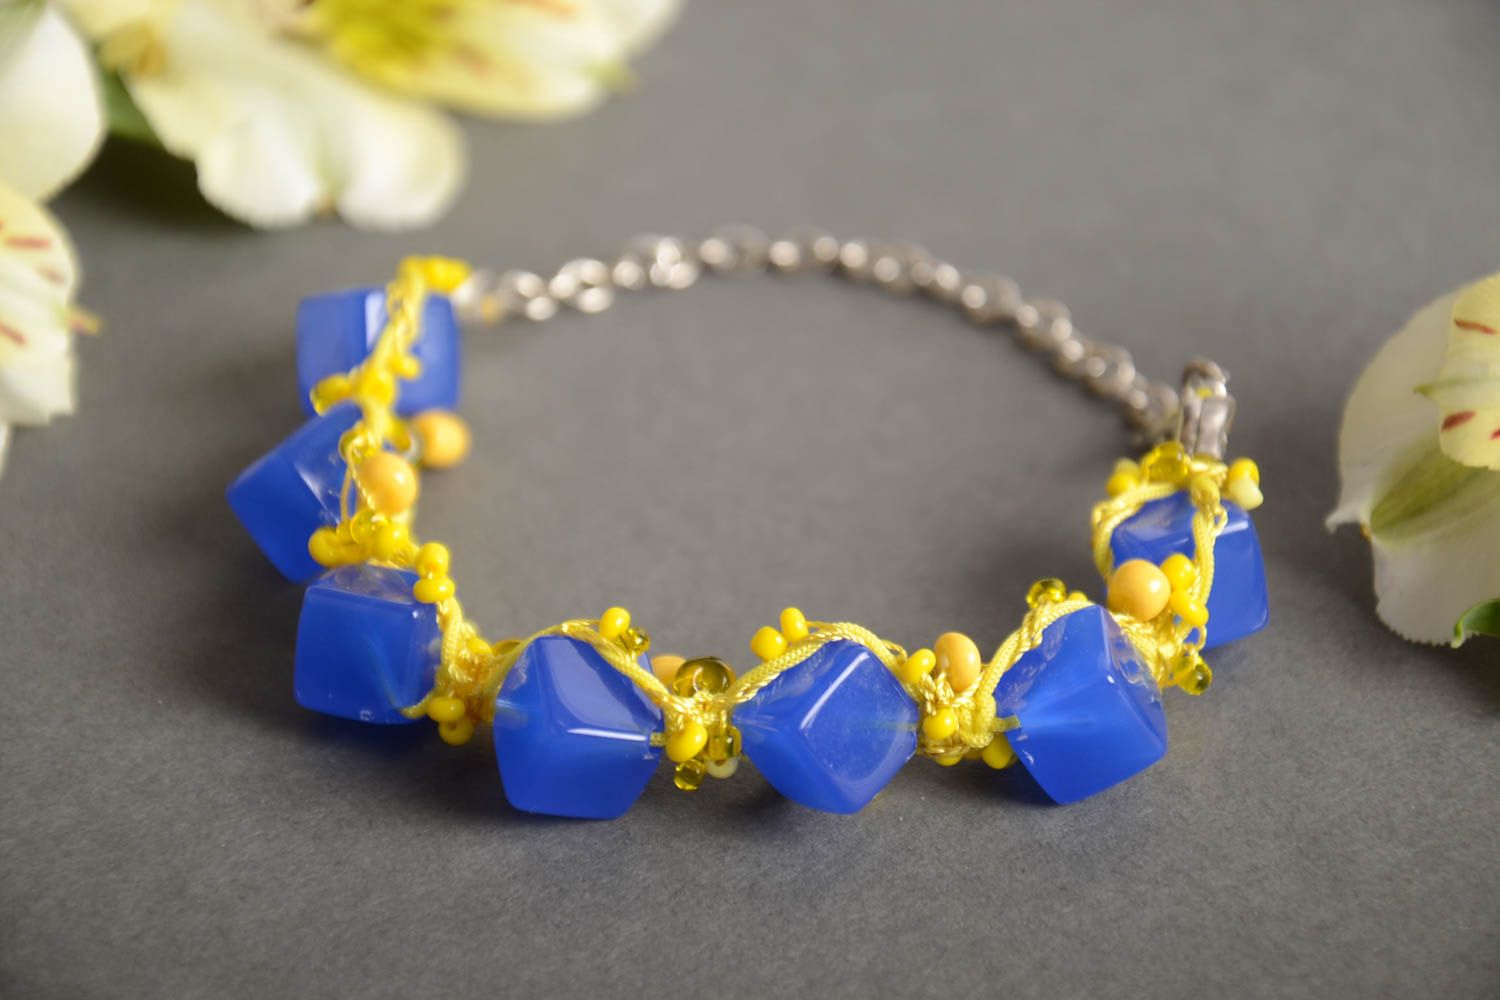 Handmade wrist bracelet crocheted of beads in yellow and blue color combination photo 1